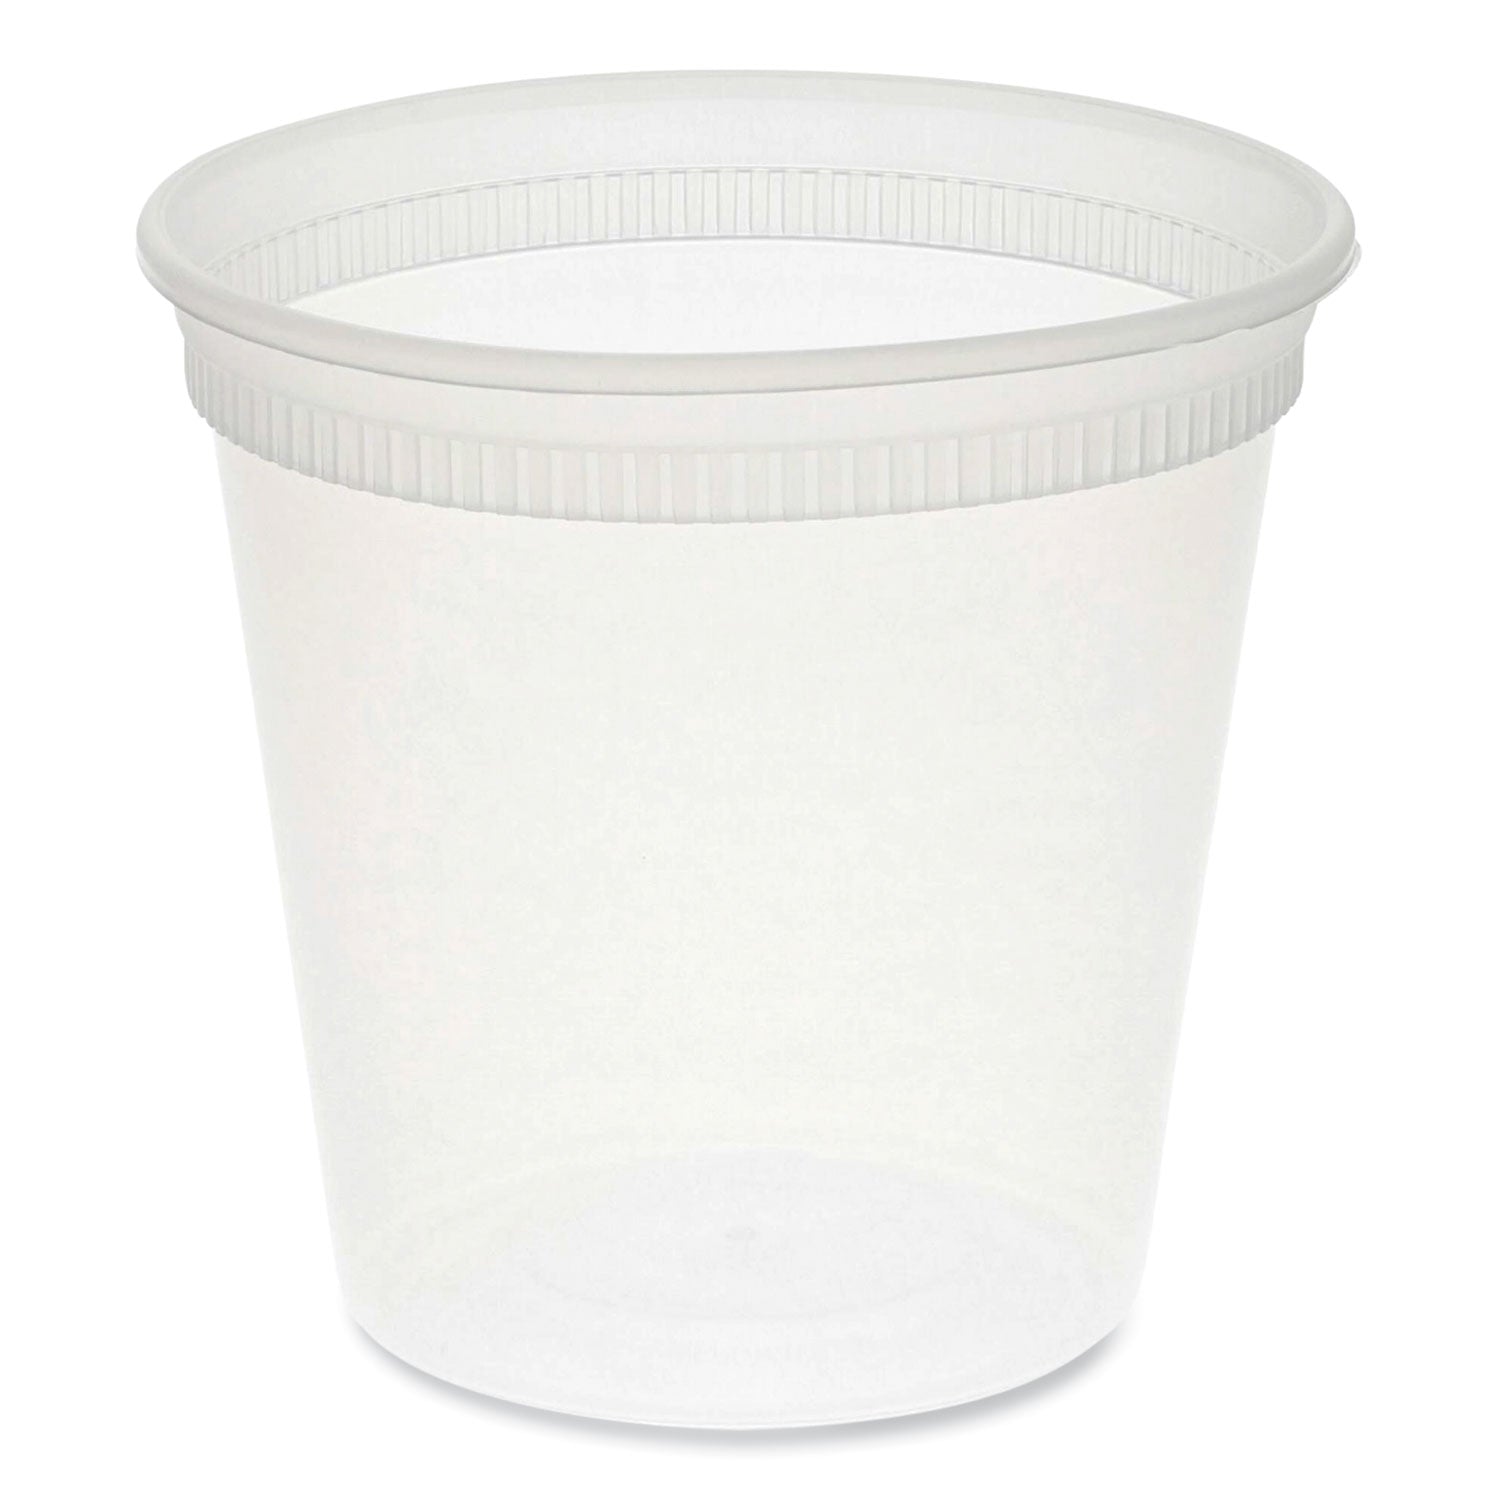 newspring-delitainer-microwavable-container-24-oz-455-x-455-x-435-clear-plastic-480-carton_pctyl5024 - 1